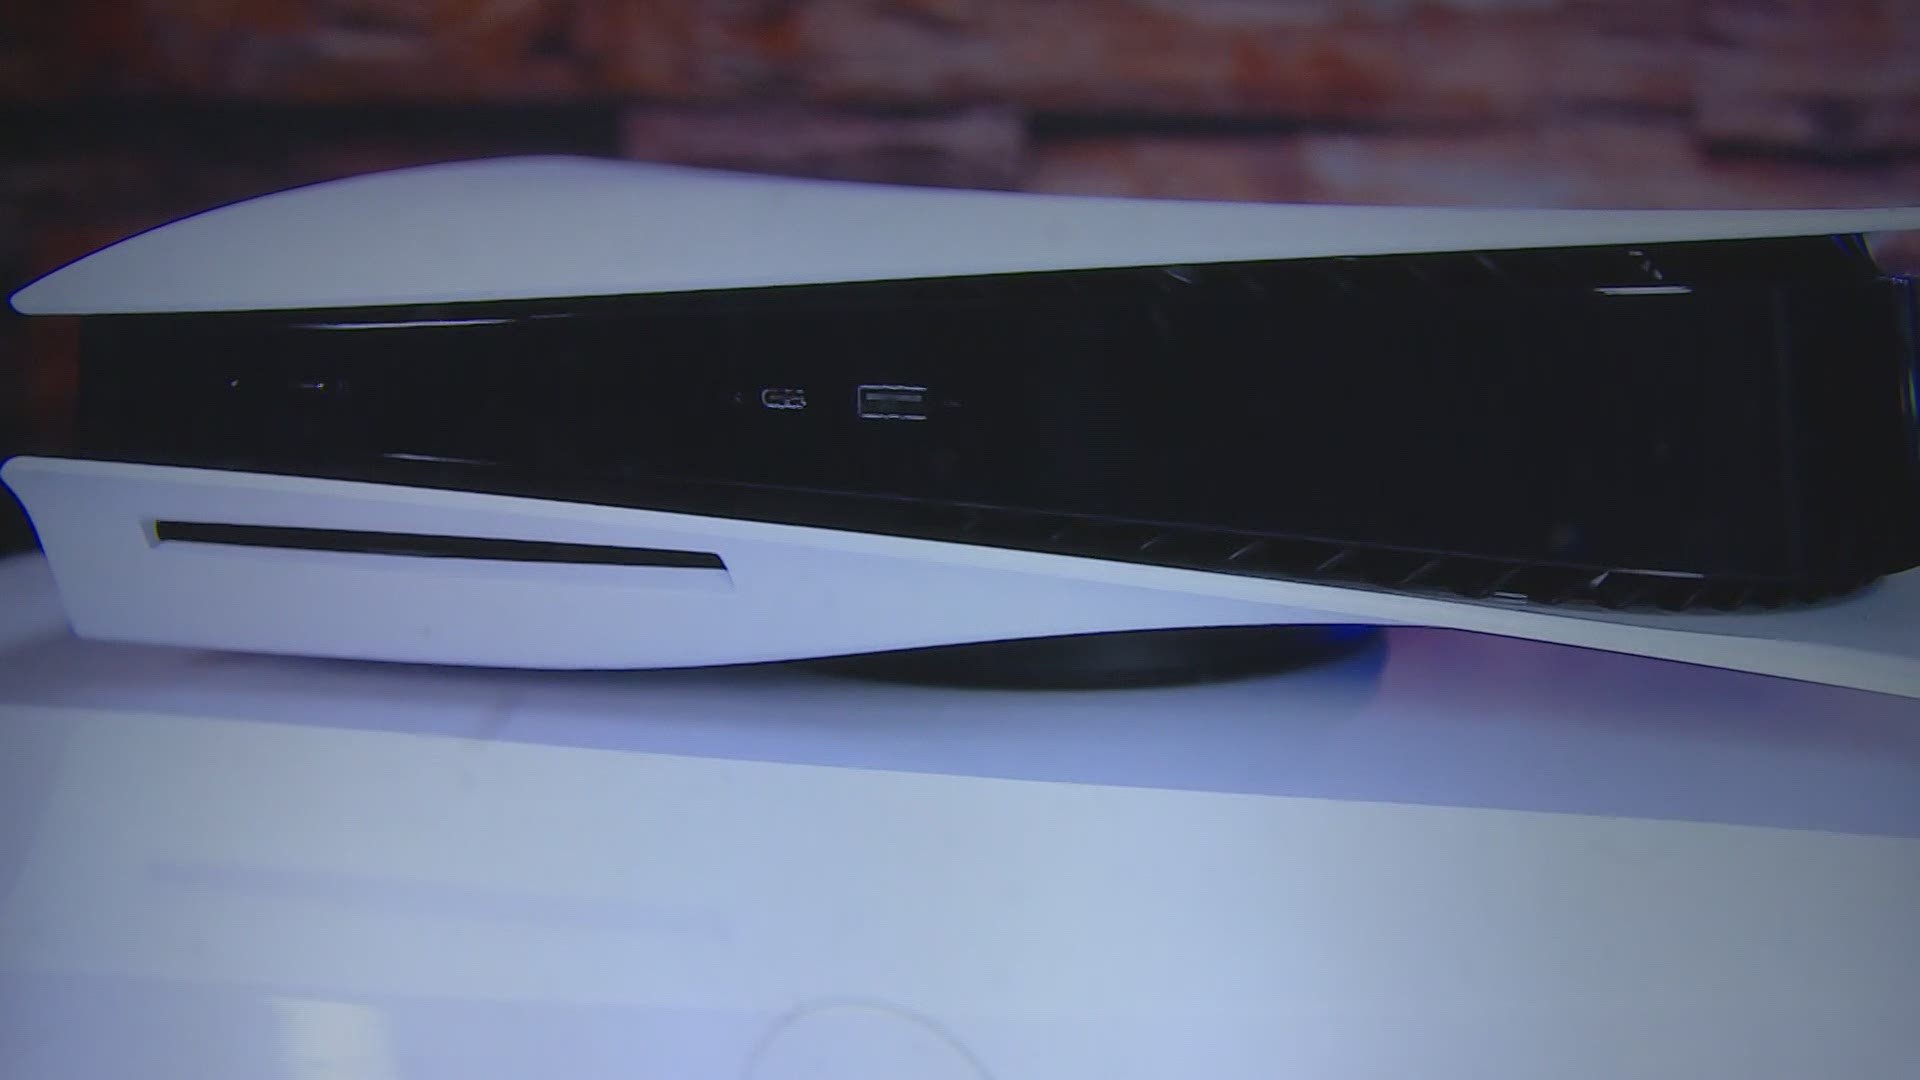 Experts say the new consoles are expected to be the "hot item" this holiday season.